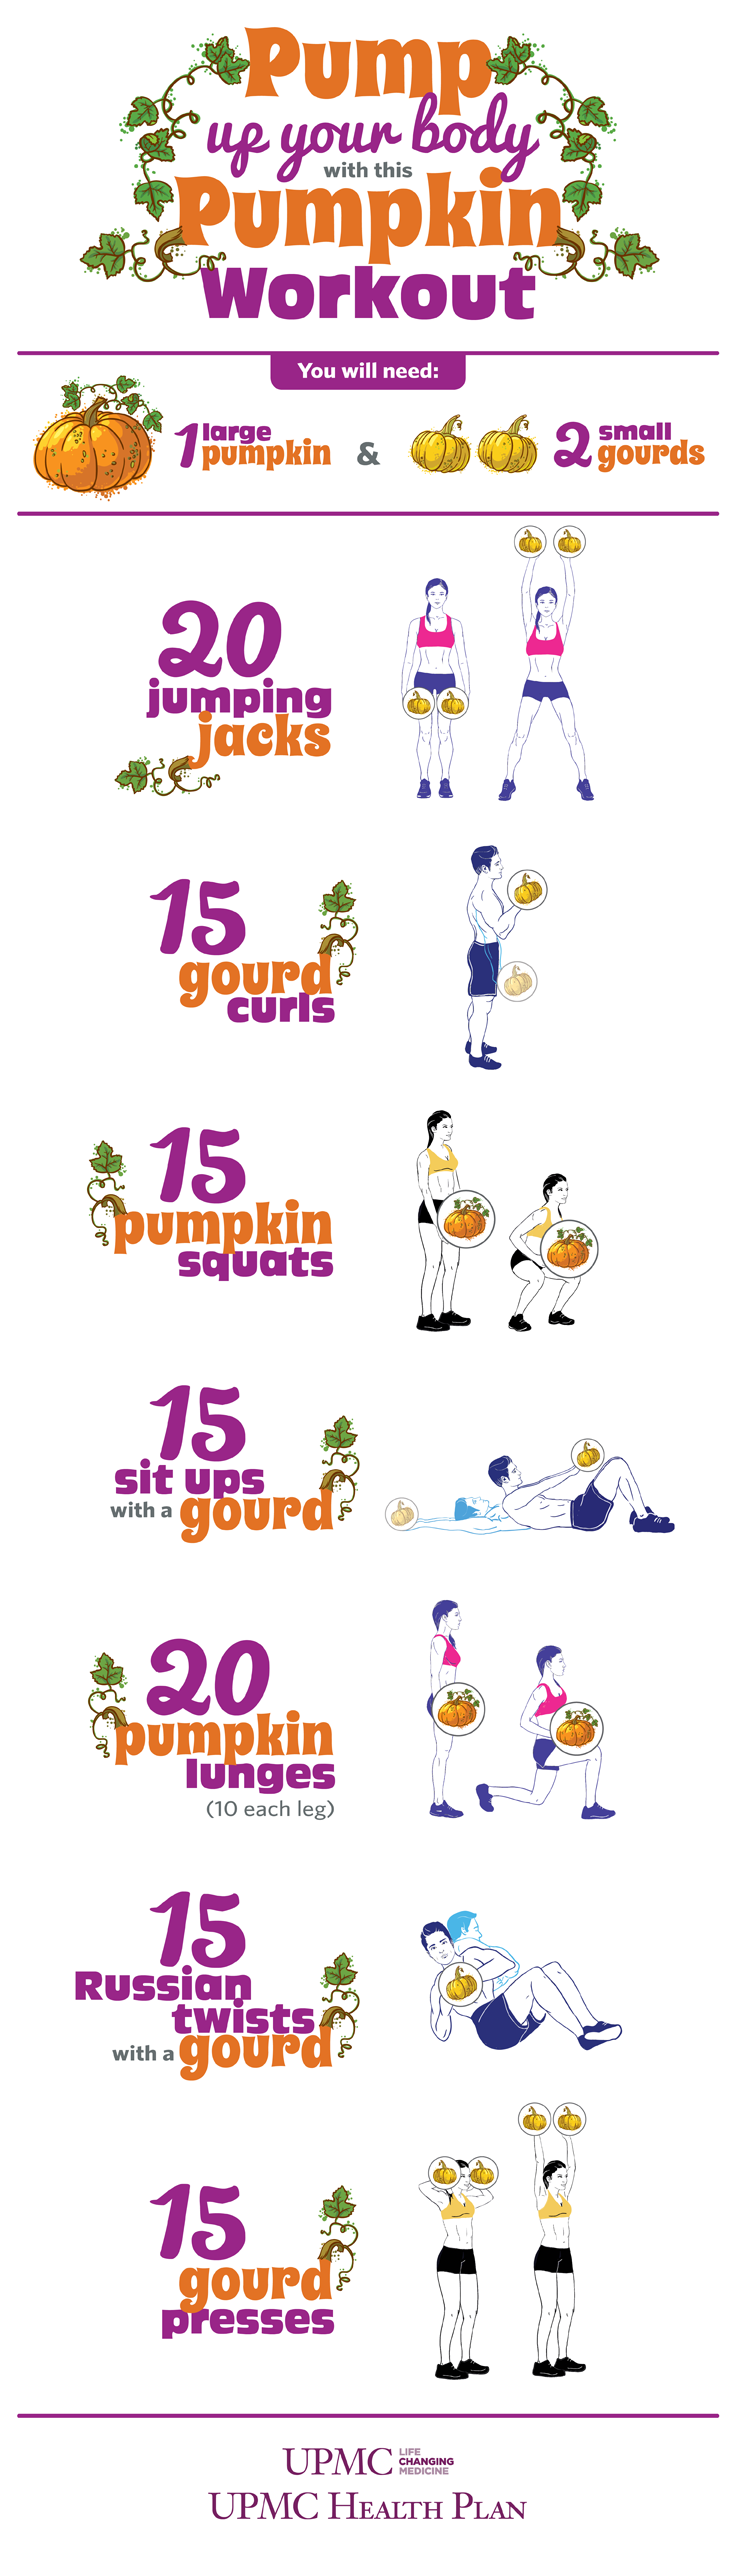 Pump up your body with this pumpkin workout!